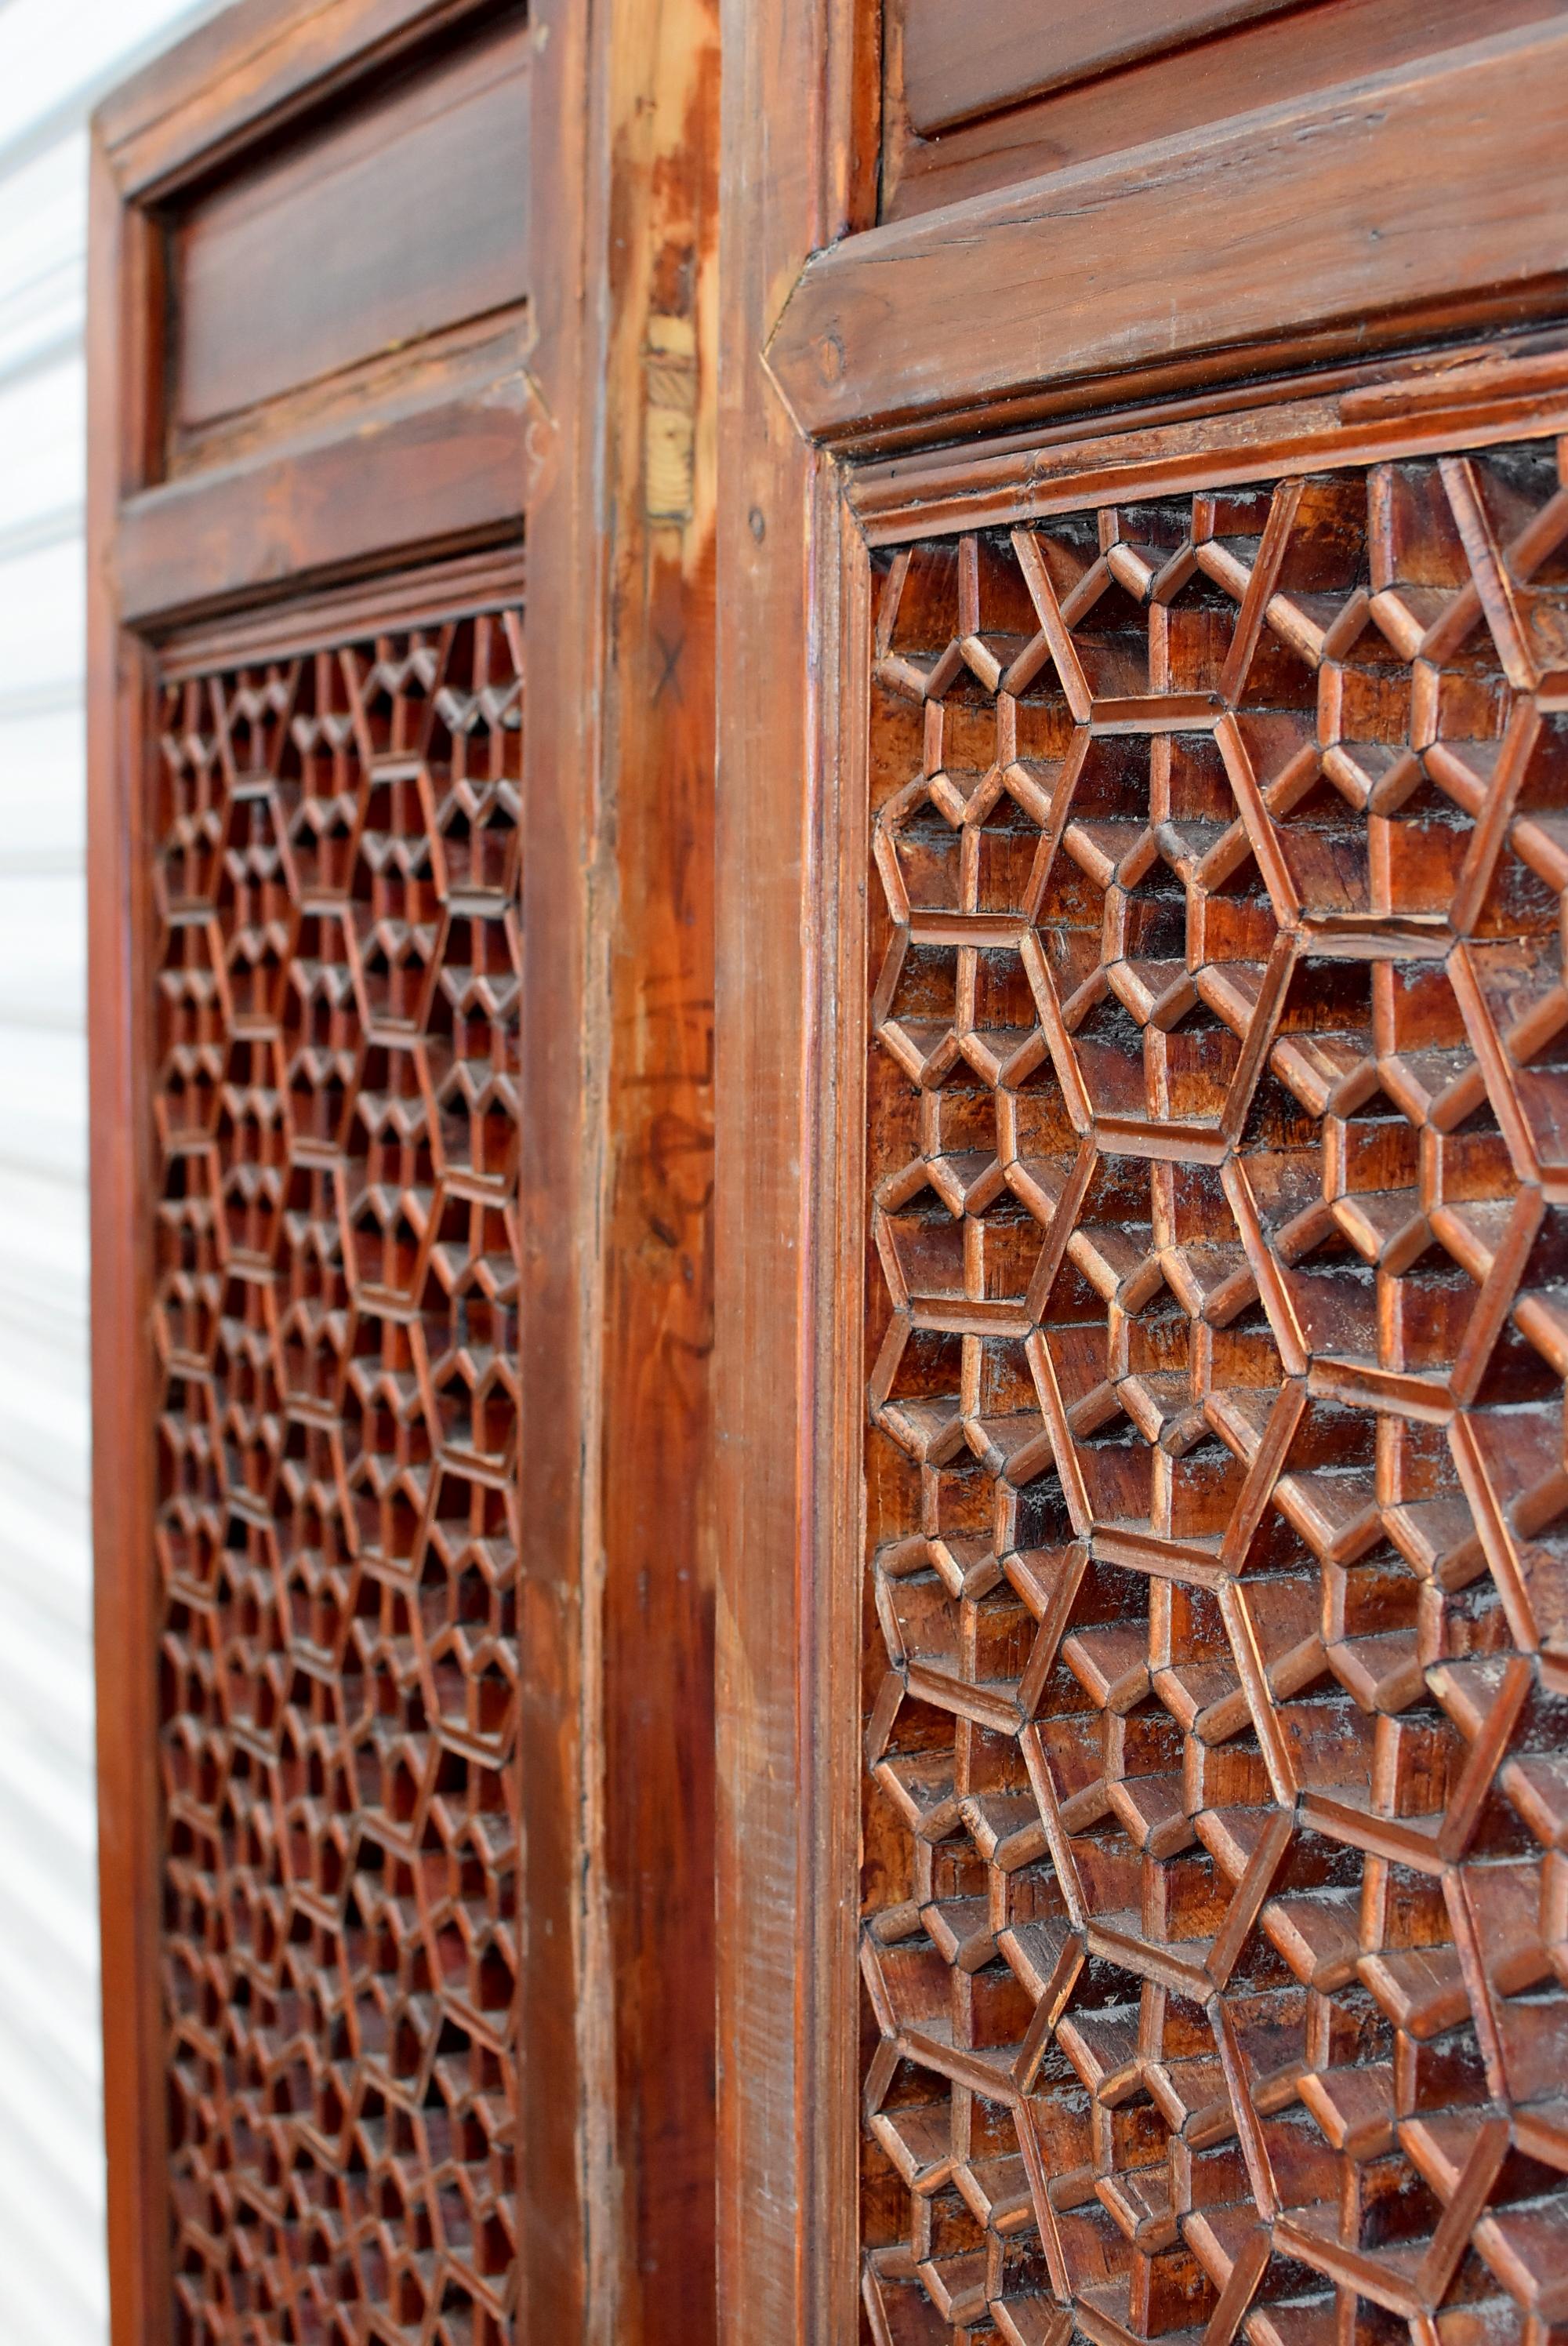 This is a pair of beautiful, 19th-early 20th century Ming style Chinese antique door screens. The main section of the screen is formed by an octagonal flower design, which are created by joining custom-cut pieces of wood using tenons and mortises,